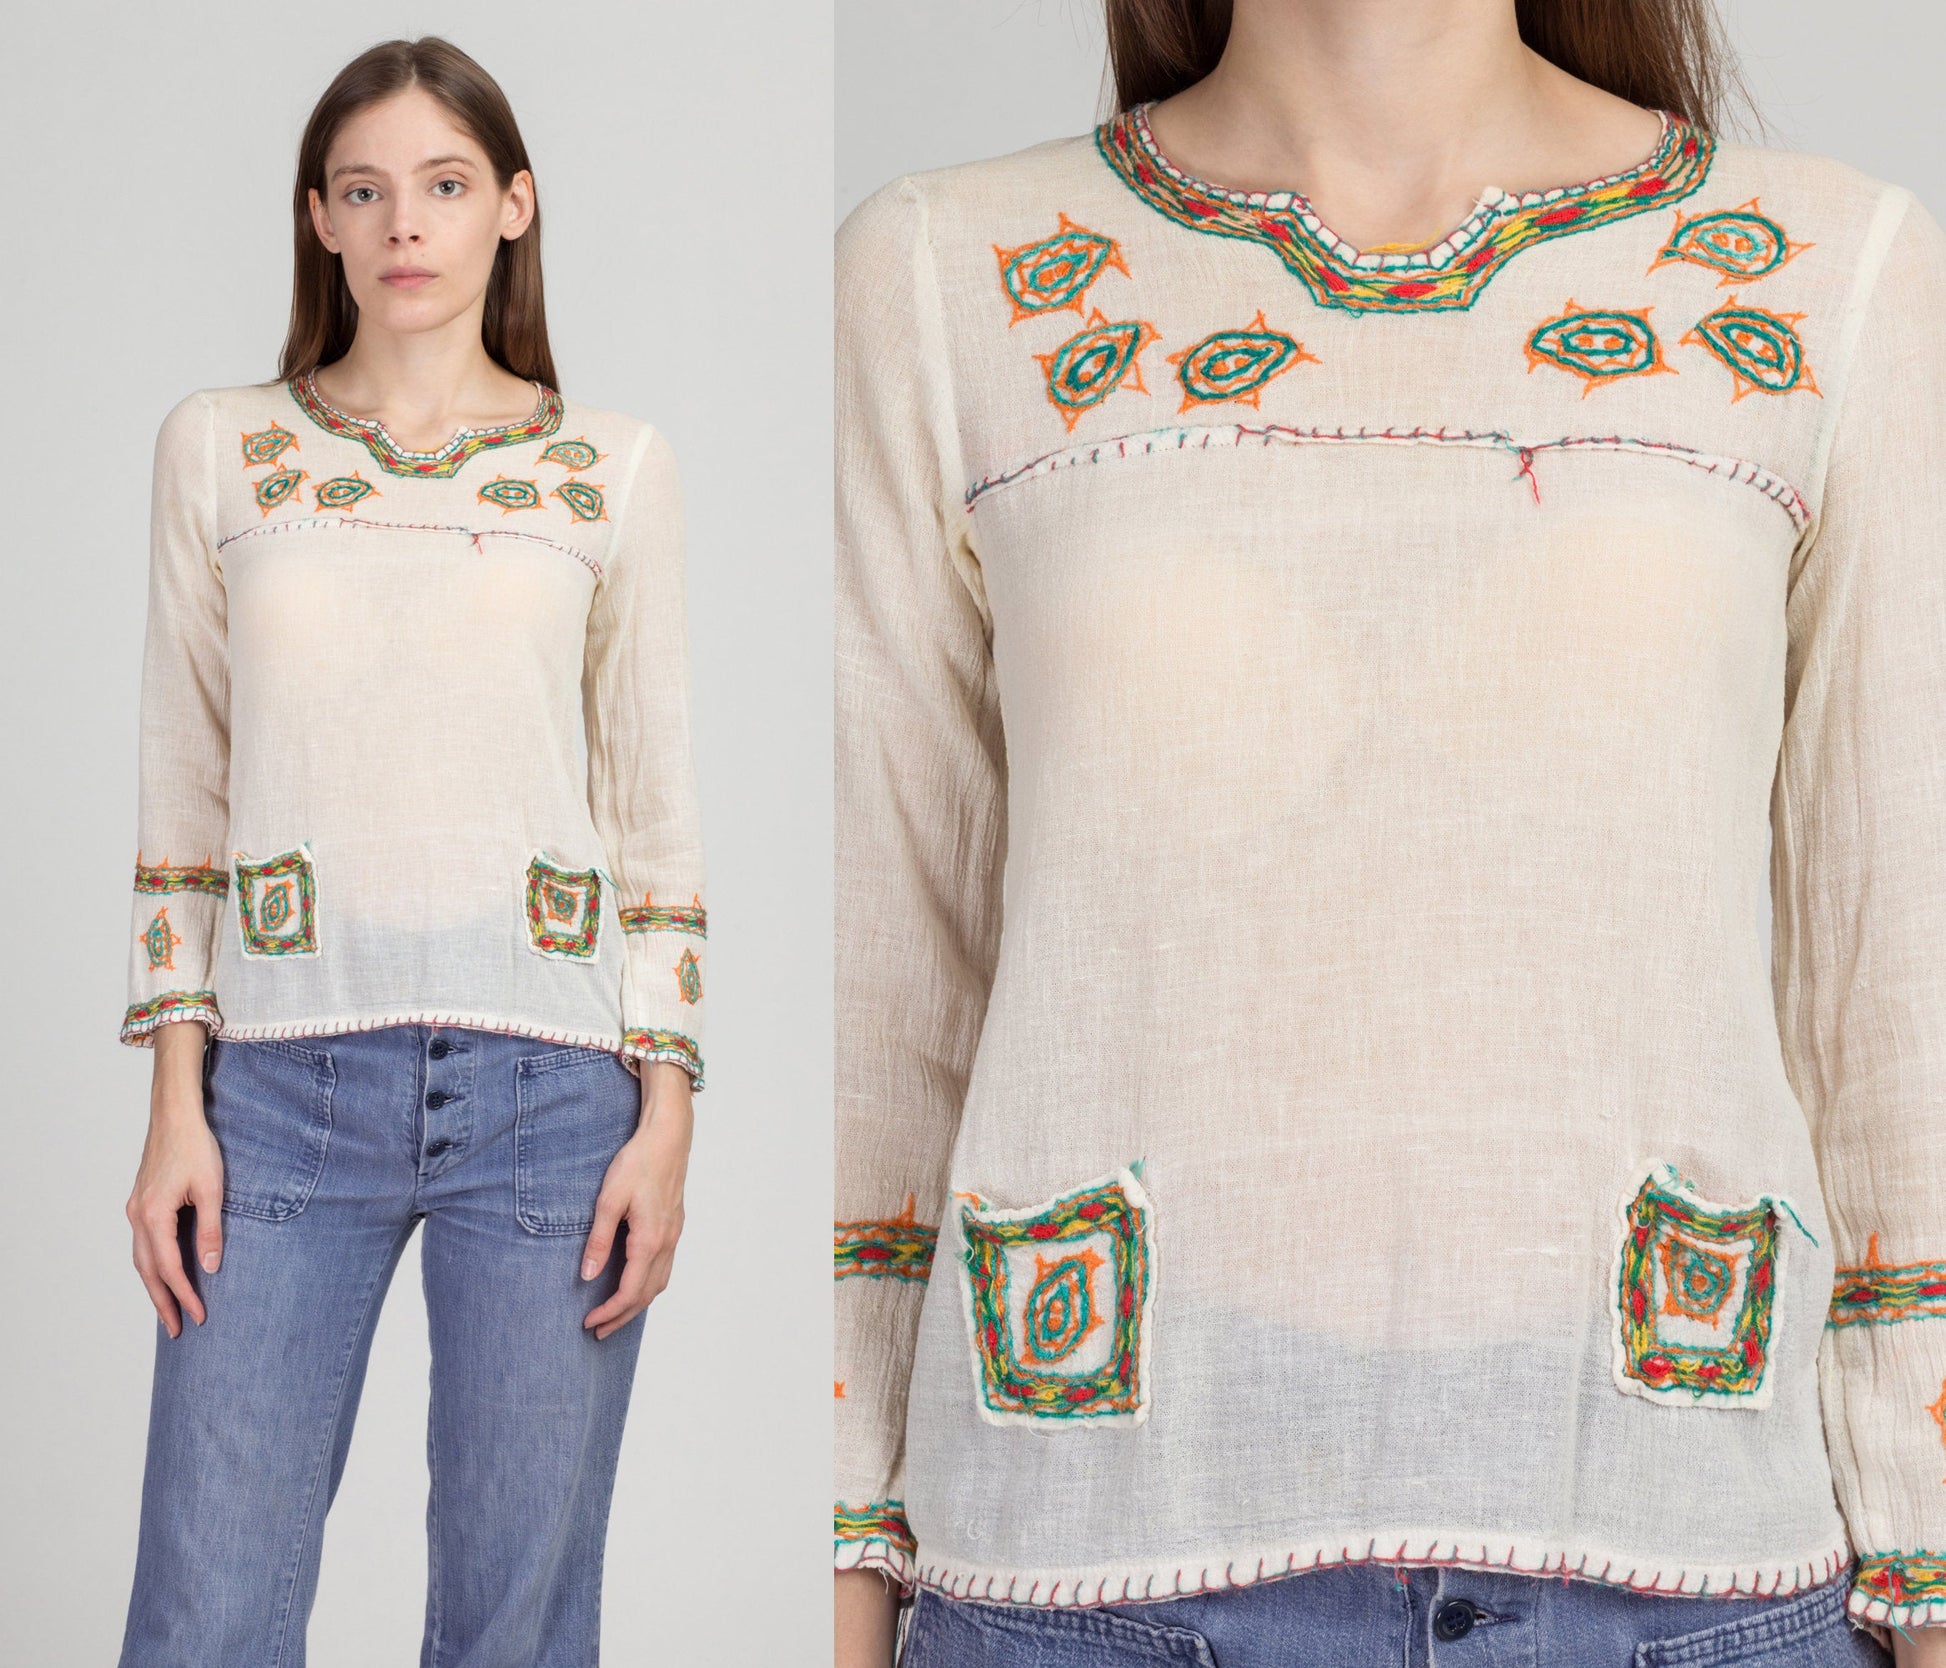 70s Floral Embroidered Peasant Shirt - Small | Vintage Boho Sheer Gauzy Cotton Hippie Blouse